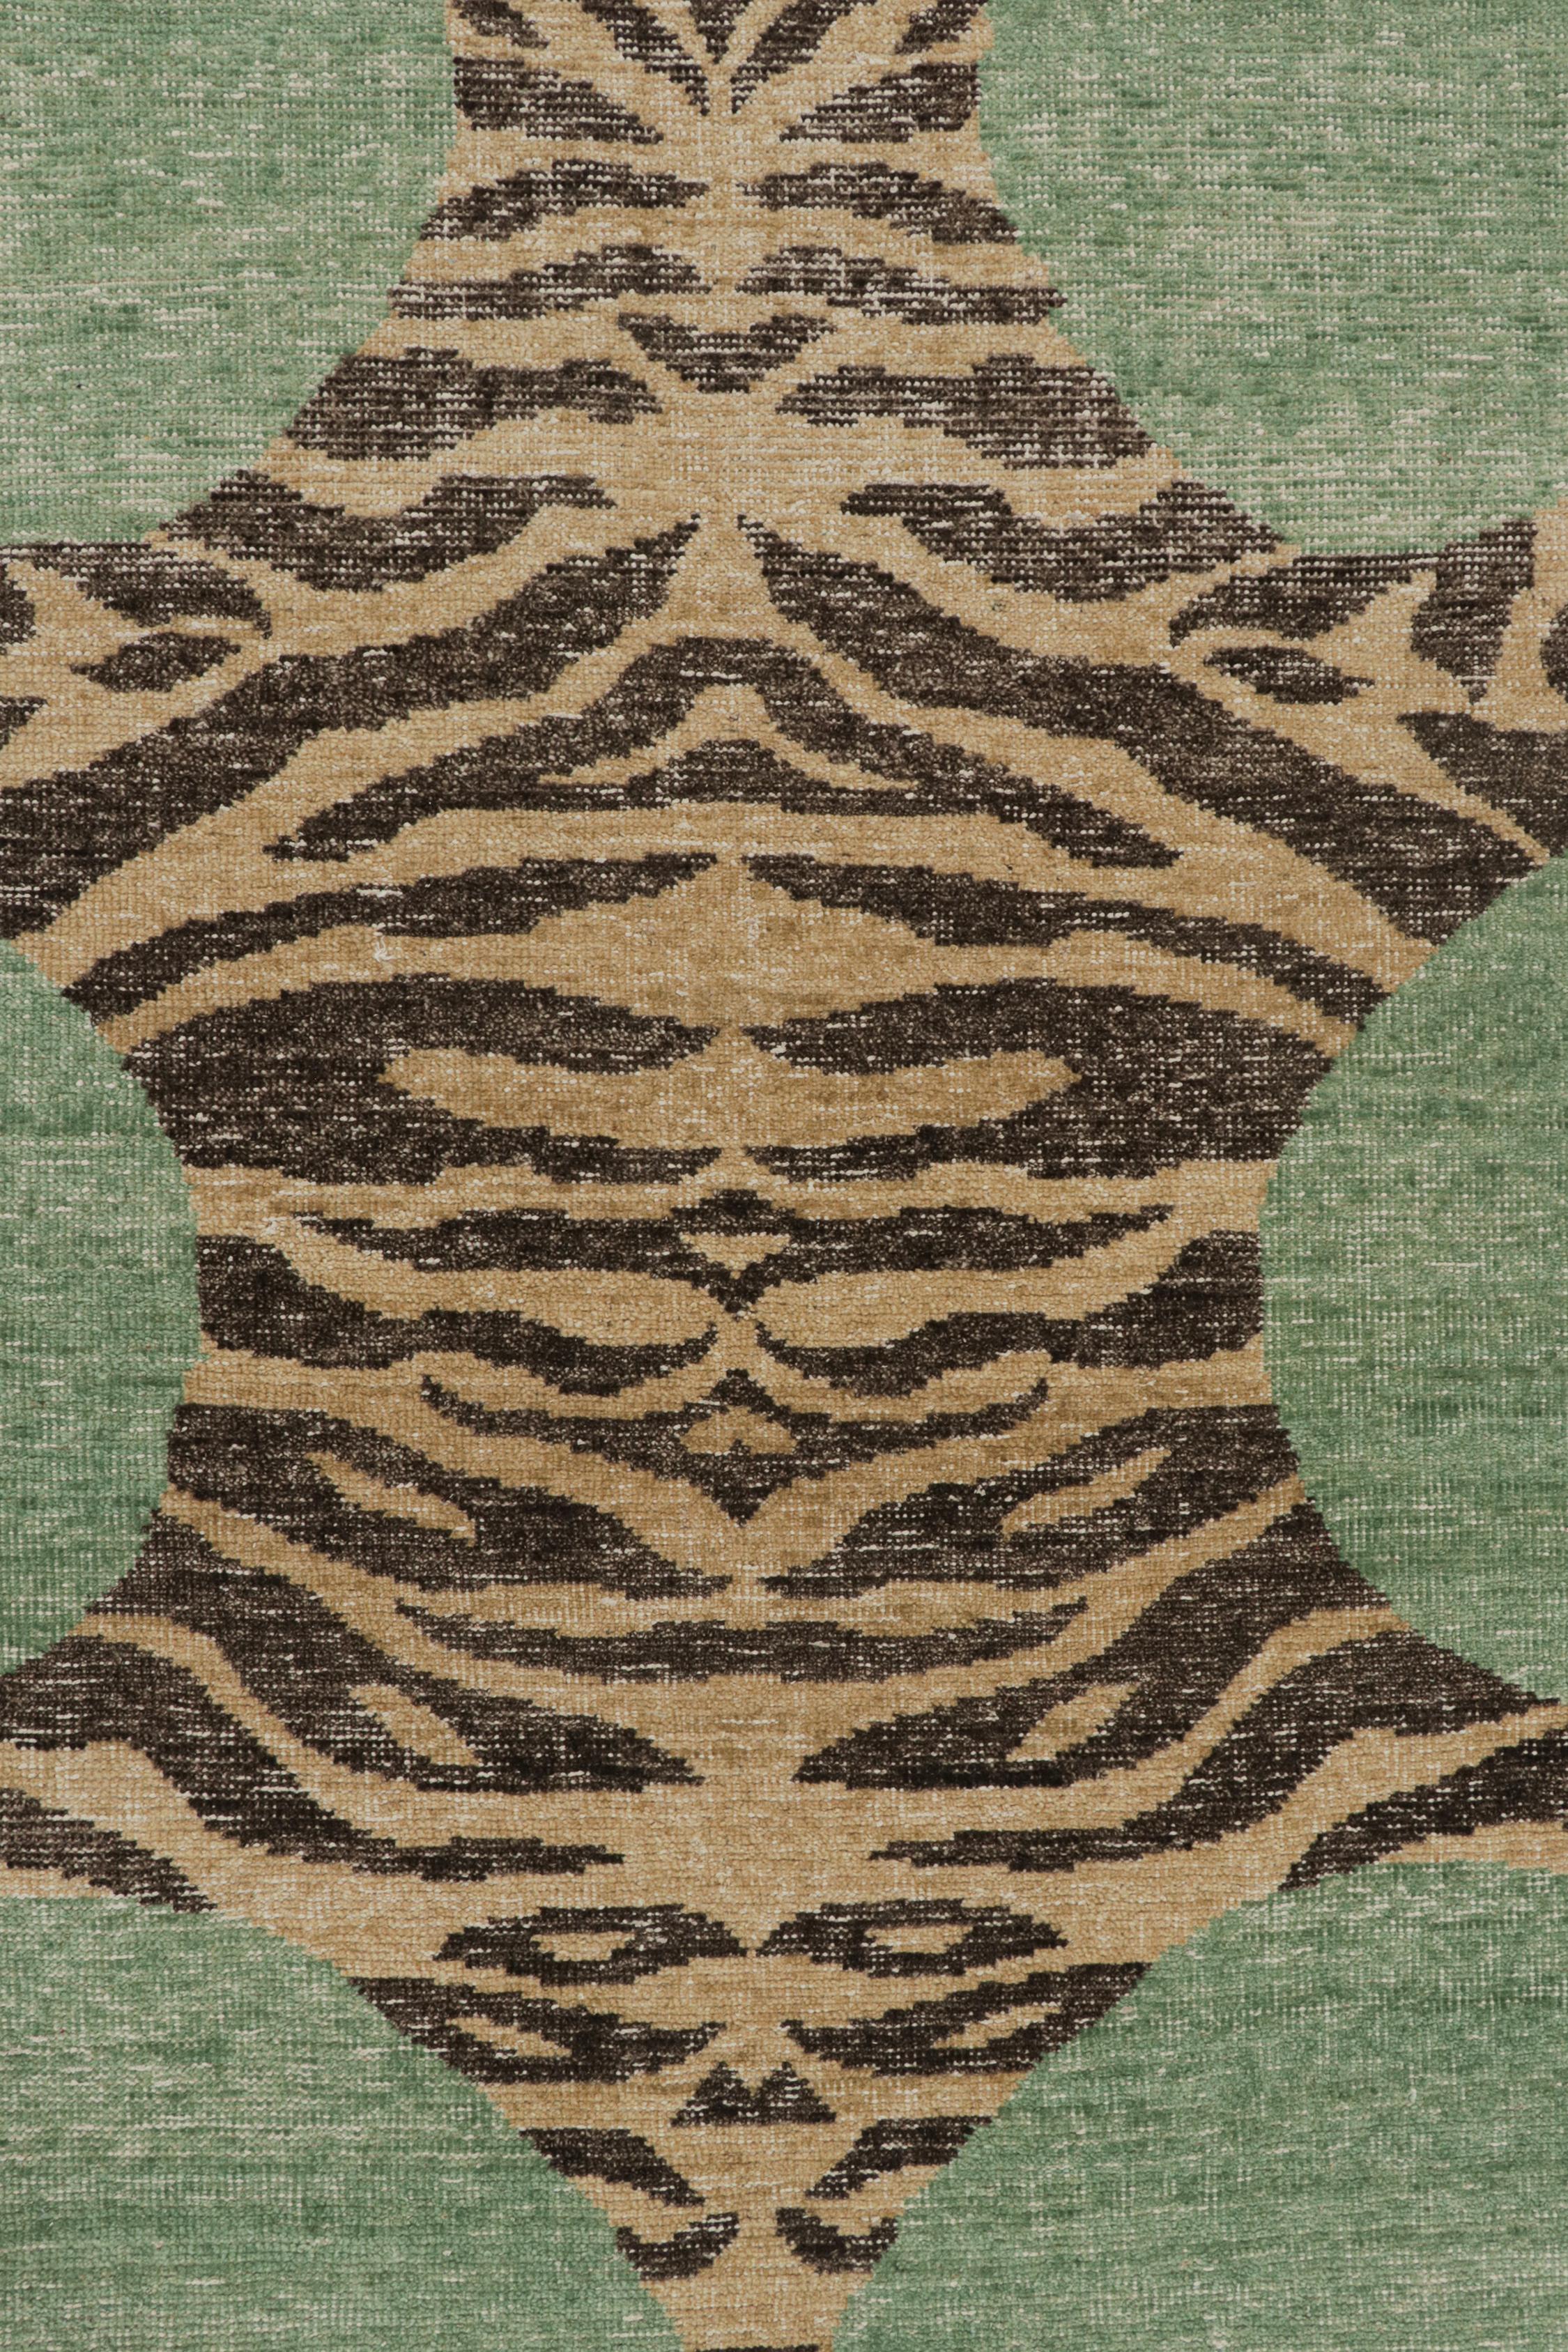 Contemporary Rug & Kilim’s Distressed Style Tiger Runner in Green, Beige & Black Pictorial For Sale